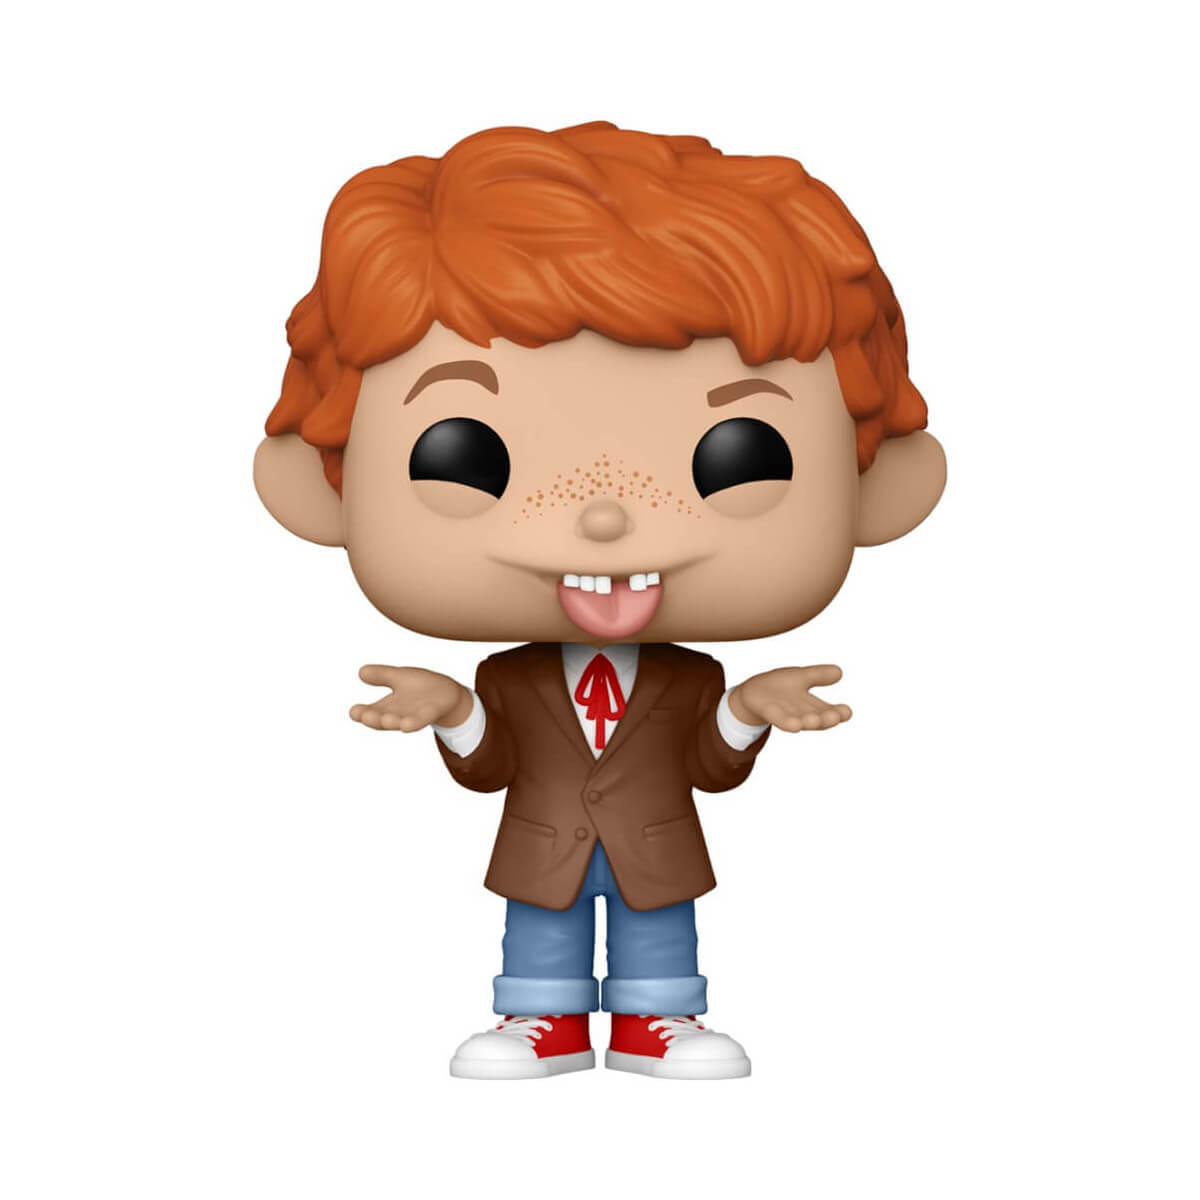 Funko POP! MAD TV Alfred E. Neuman Vinyl Figure #29 Tongue Out Chase